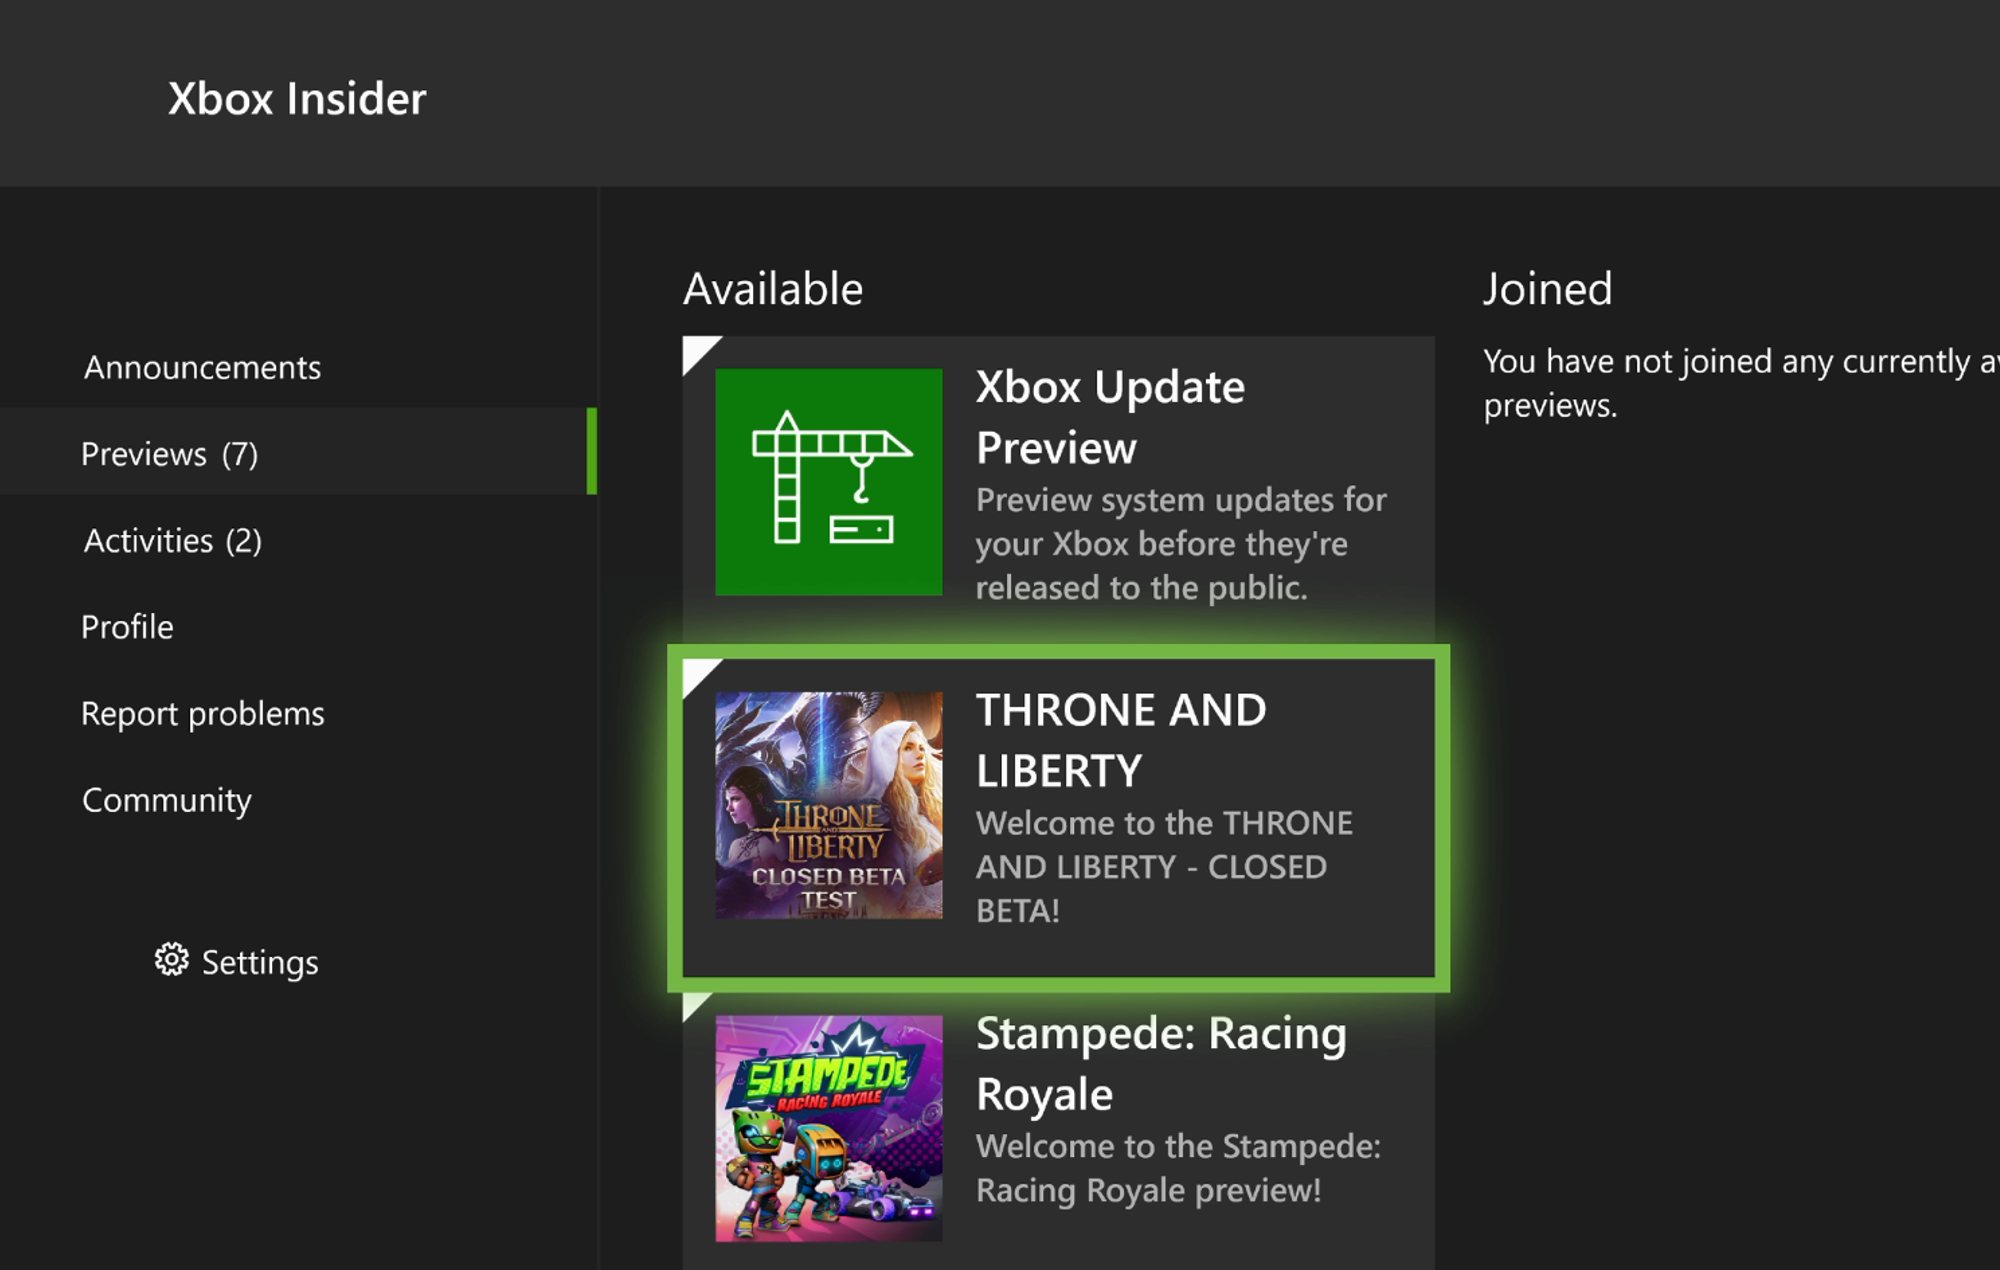 Throne and Liberty Closed Beta Access: The Xbox Insider Hub can be seen